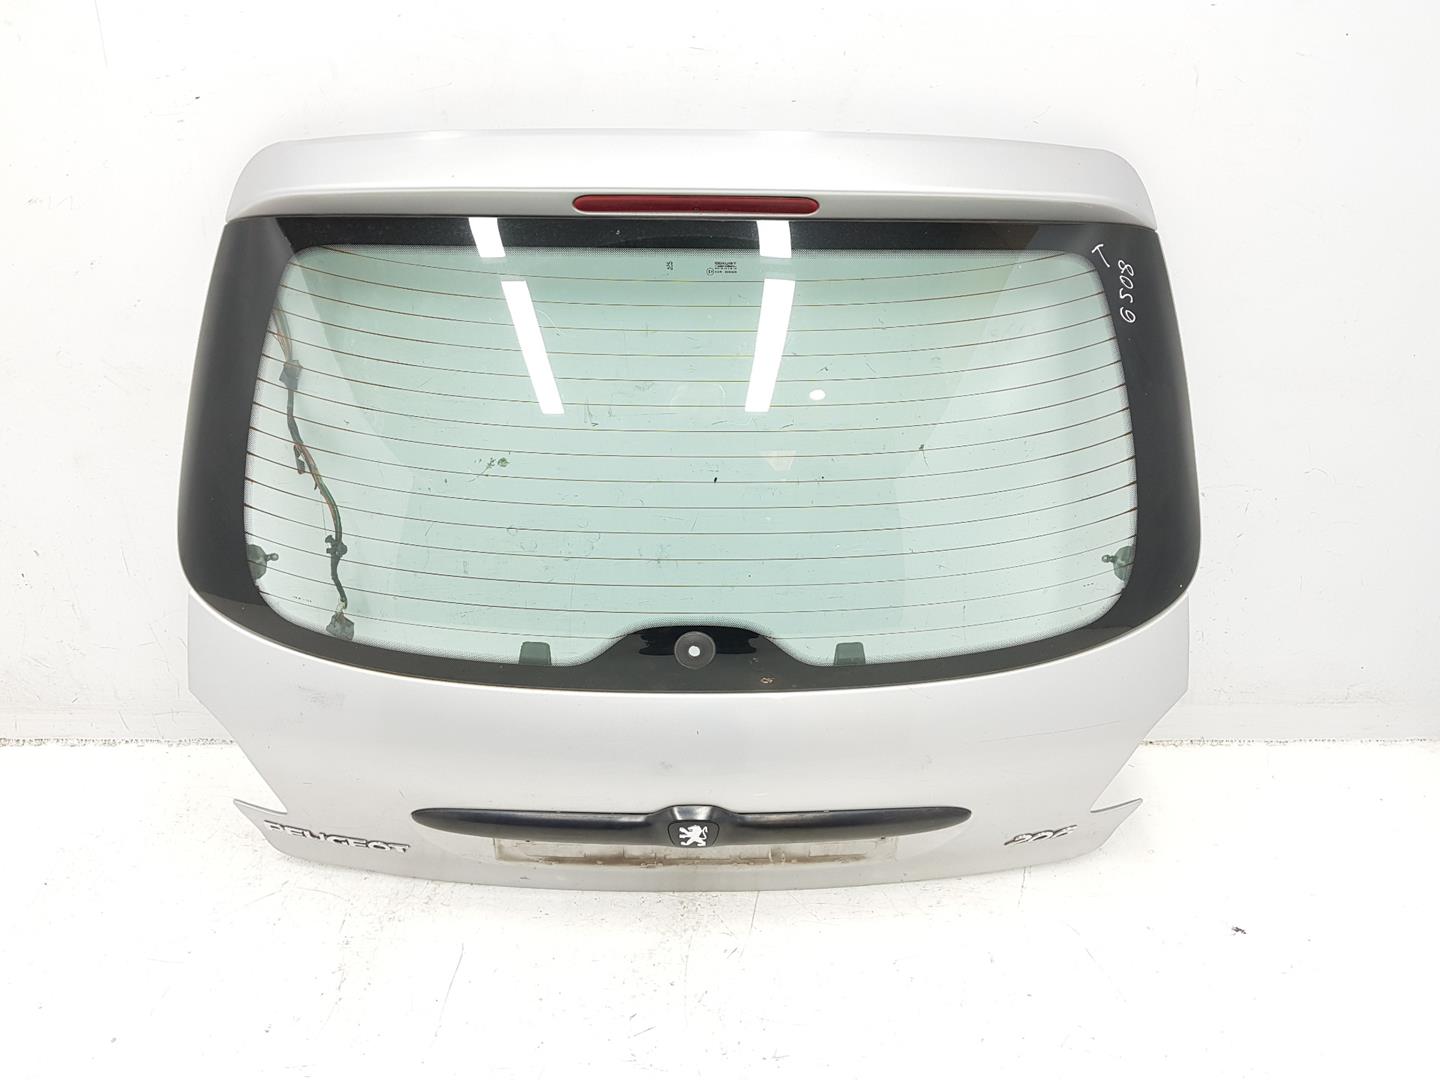 PEUGEOT 206 1 generation (1998-2009) Bootlid Rear Boot 8701R5, 8701R5, COLORGRISCUARZOEYC 24217028